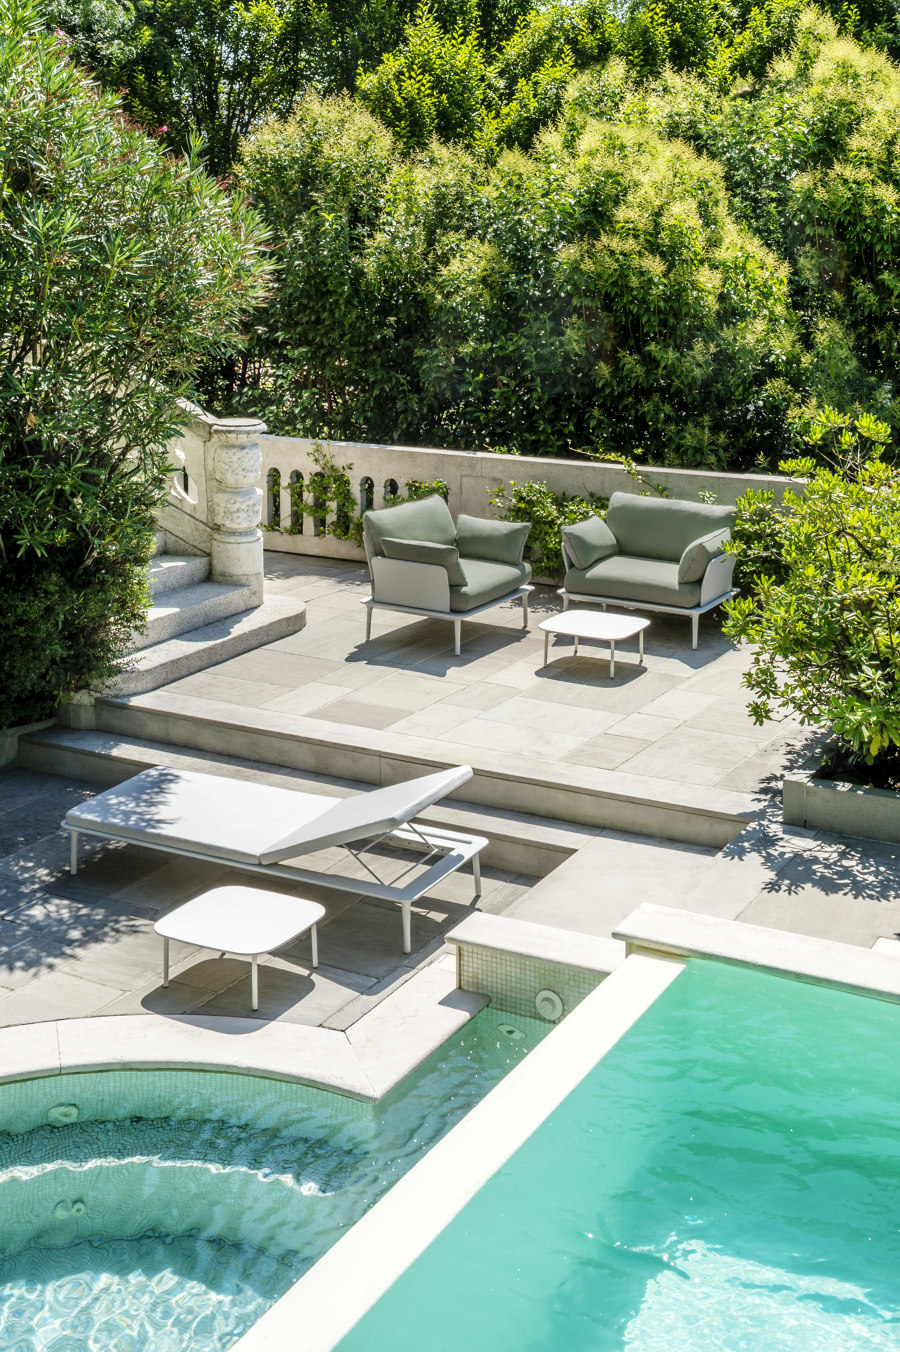 It's elementary: new outdoor furniture from Pedrali | Novedades